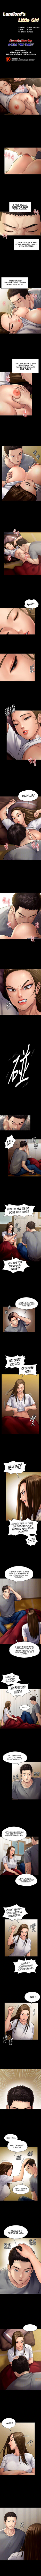 Panel Image 1 for chapter 130 of manhwa Queen Bee on read.oppai.stream